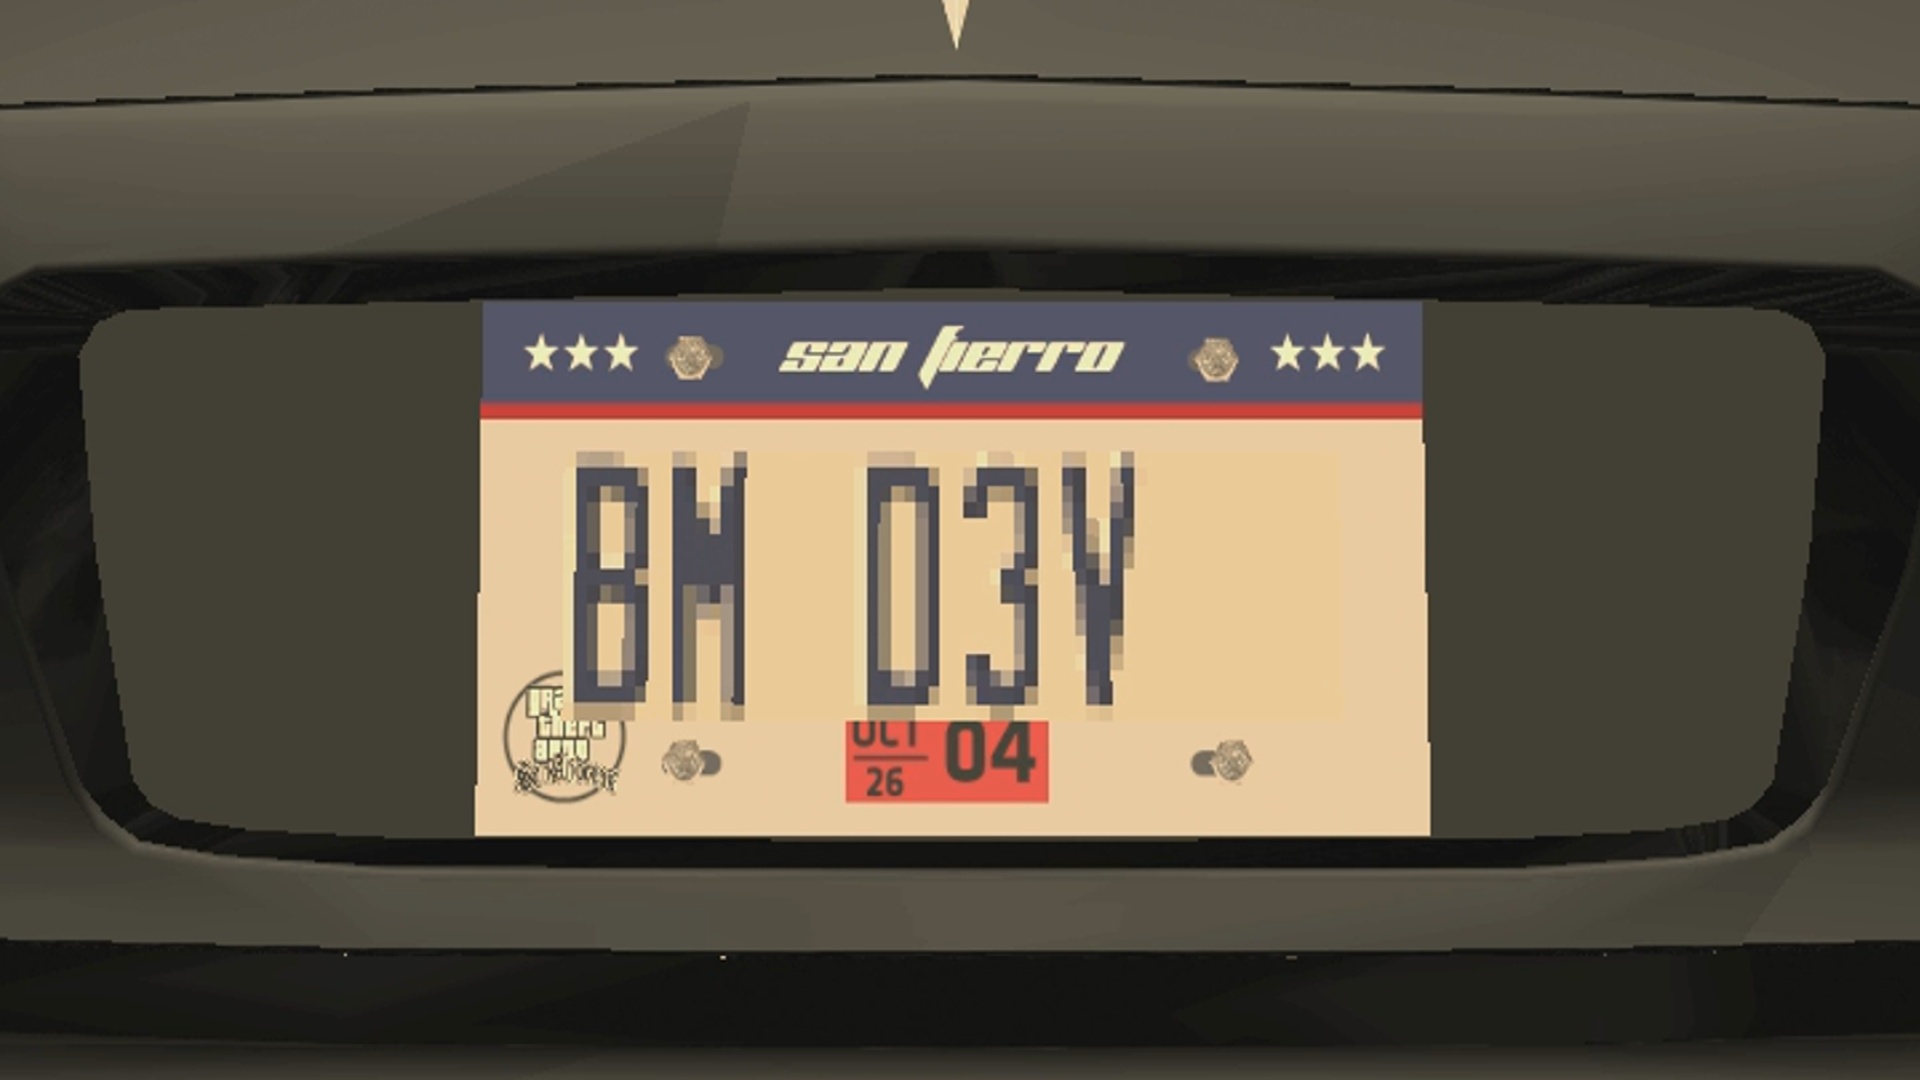 gta online license plate 4vjld105 meaning